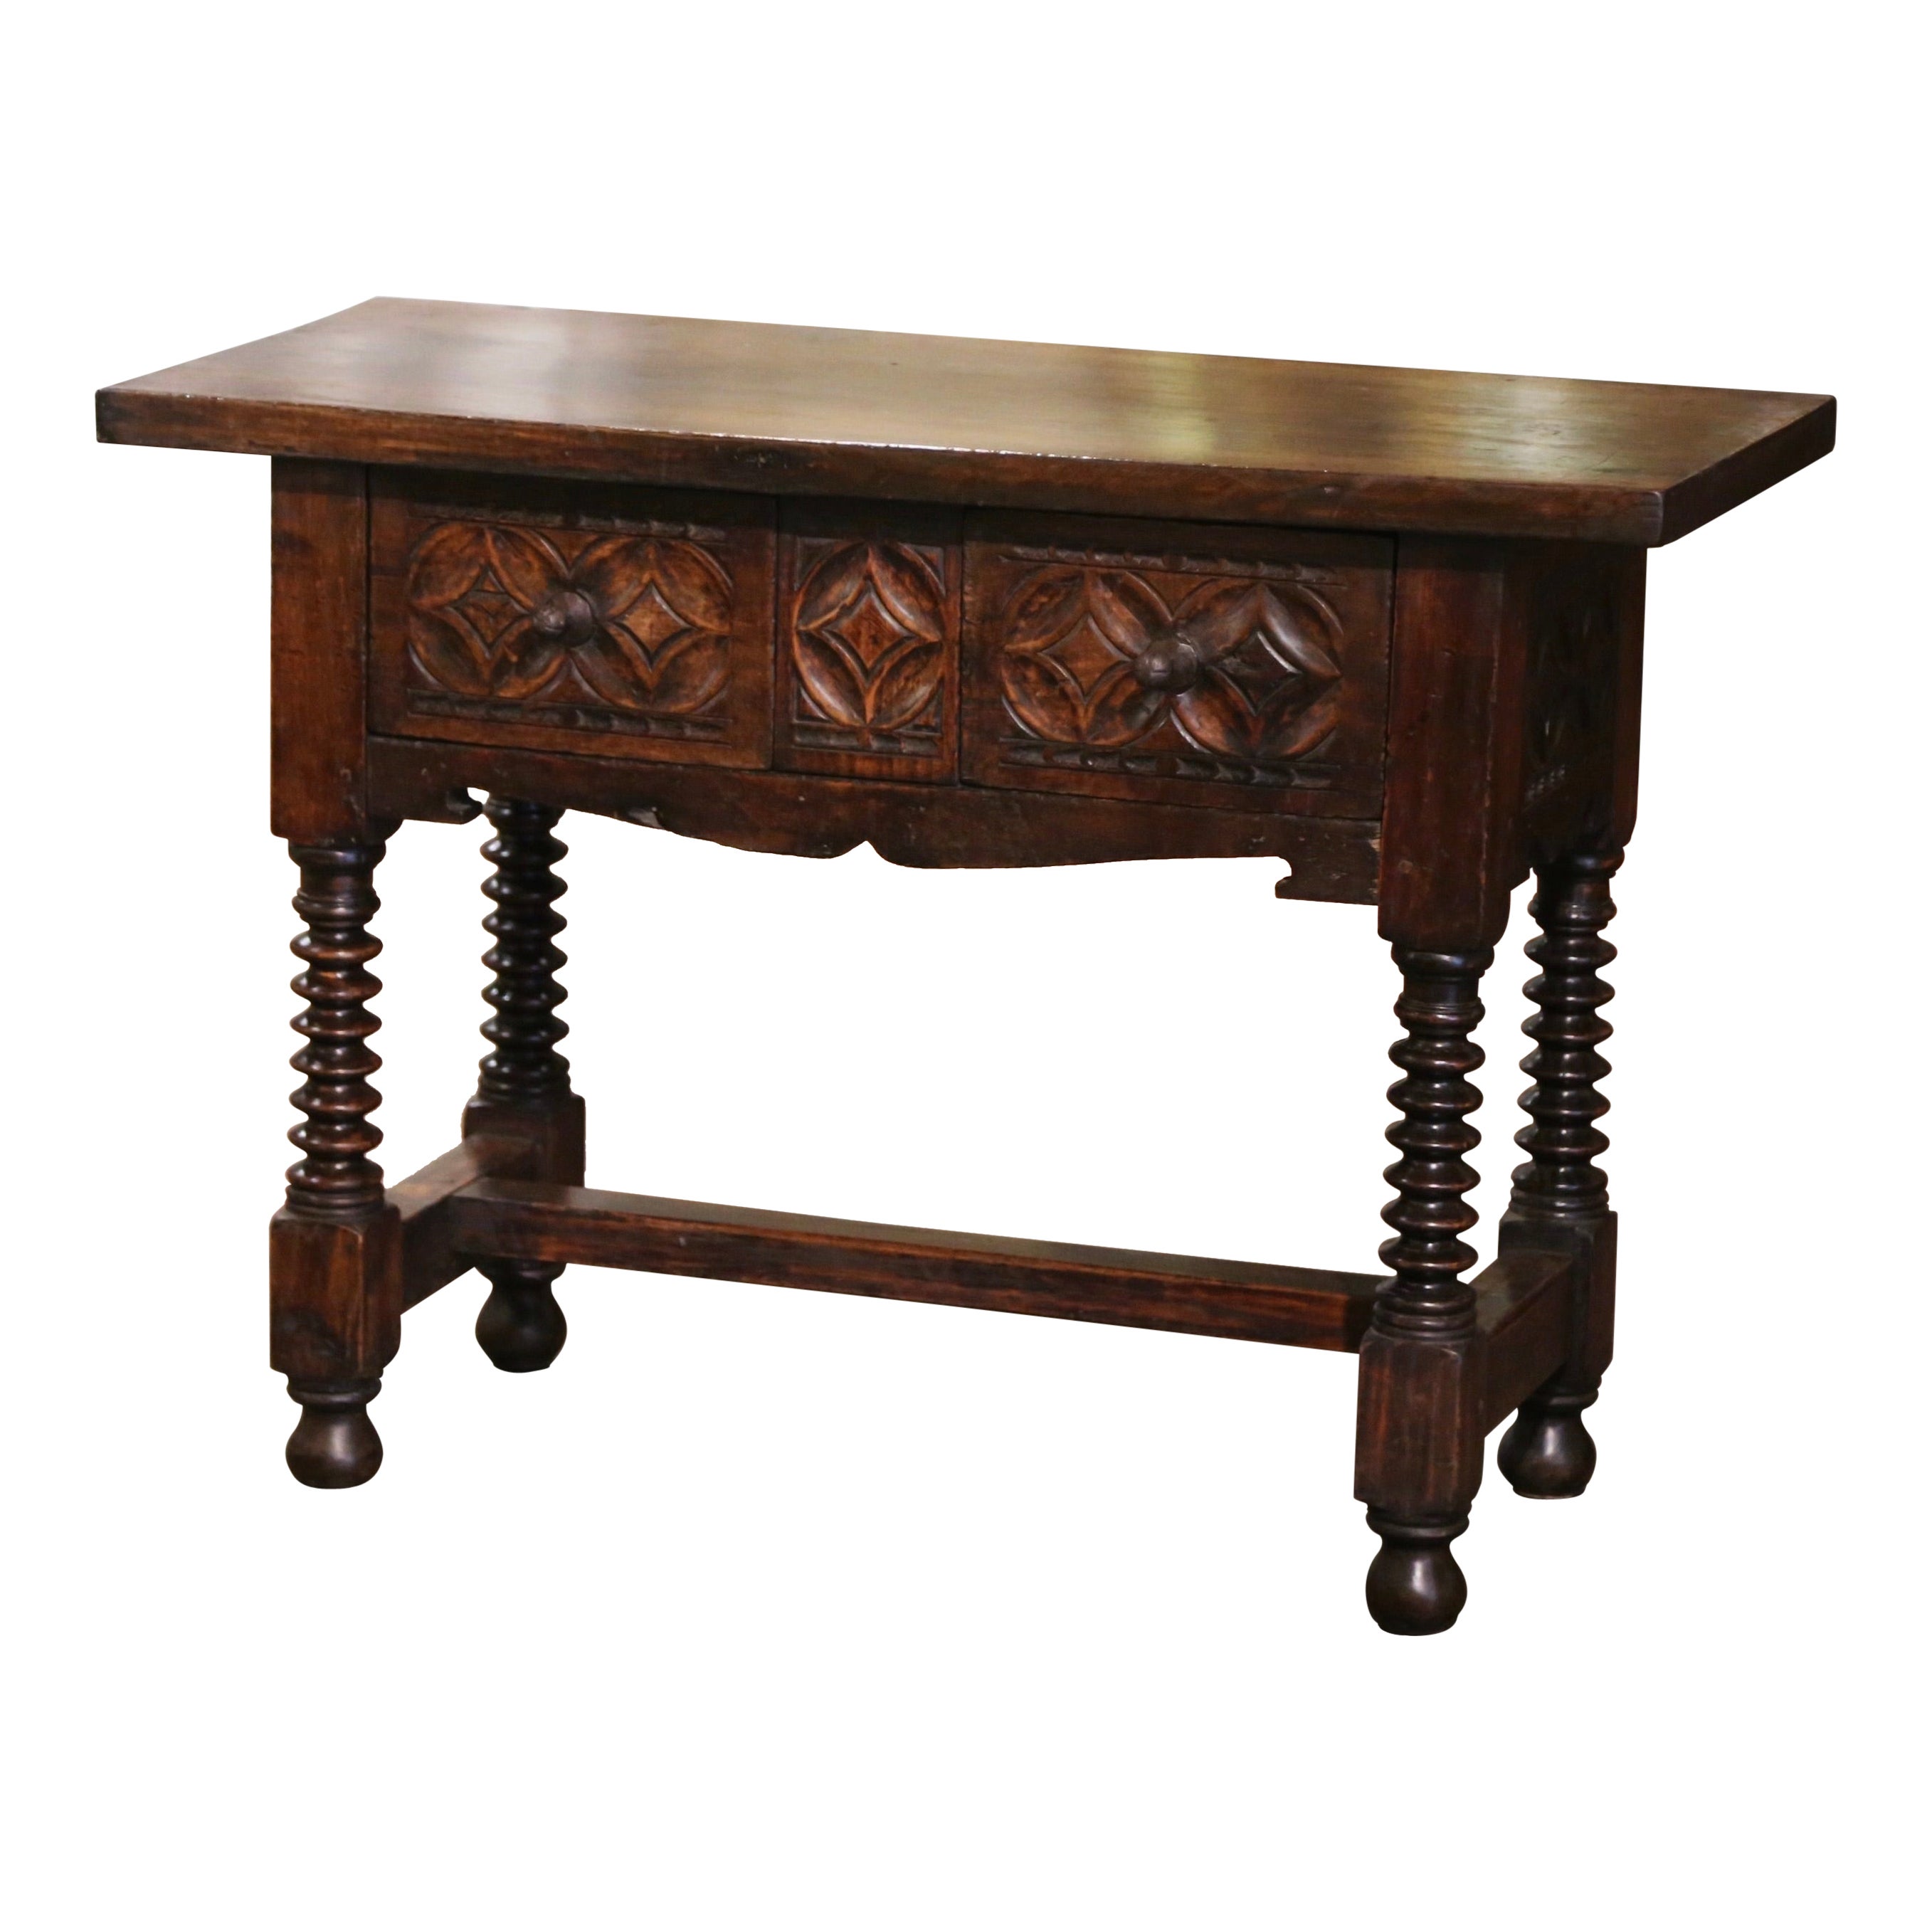 18th Century Spanish Renaissance Carved Walnut Console Table with Drawers For Sale